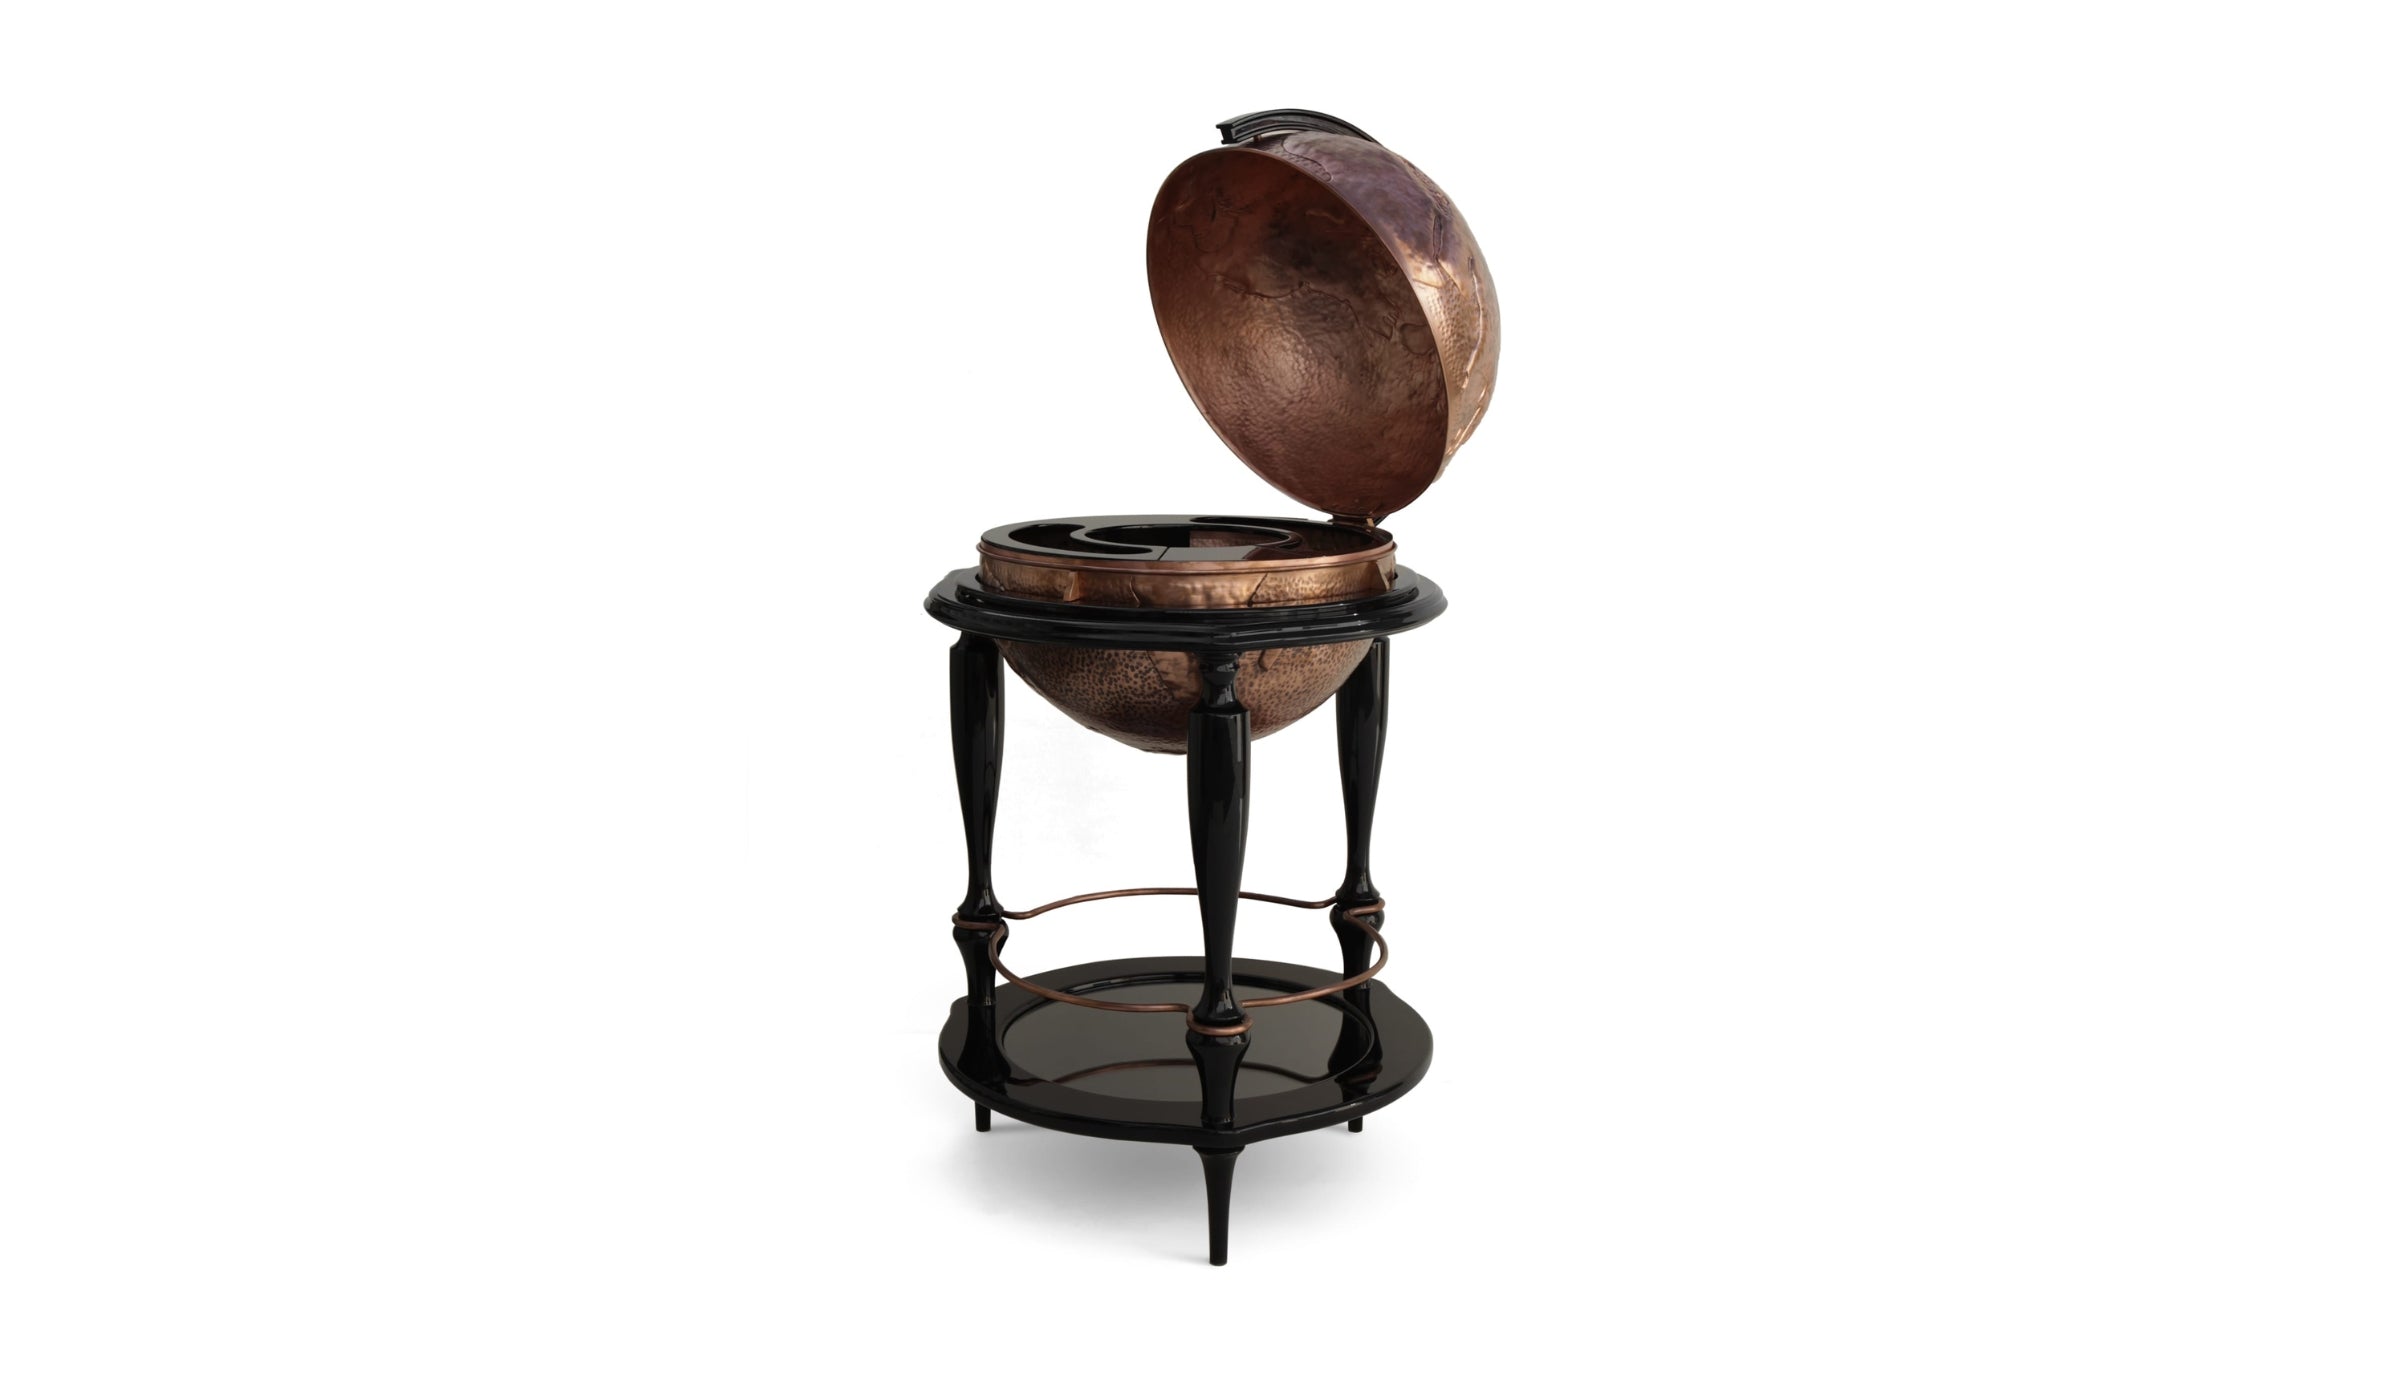 Equator - Elegant globe bar in hand-hammered copper and black lacquered wood